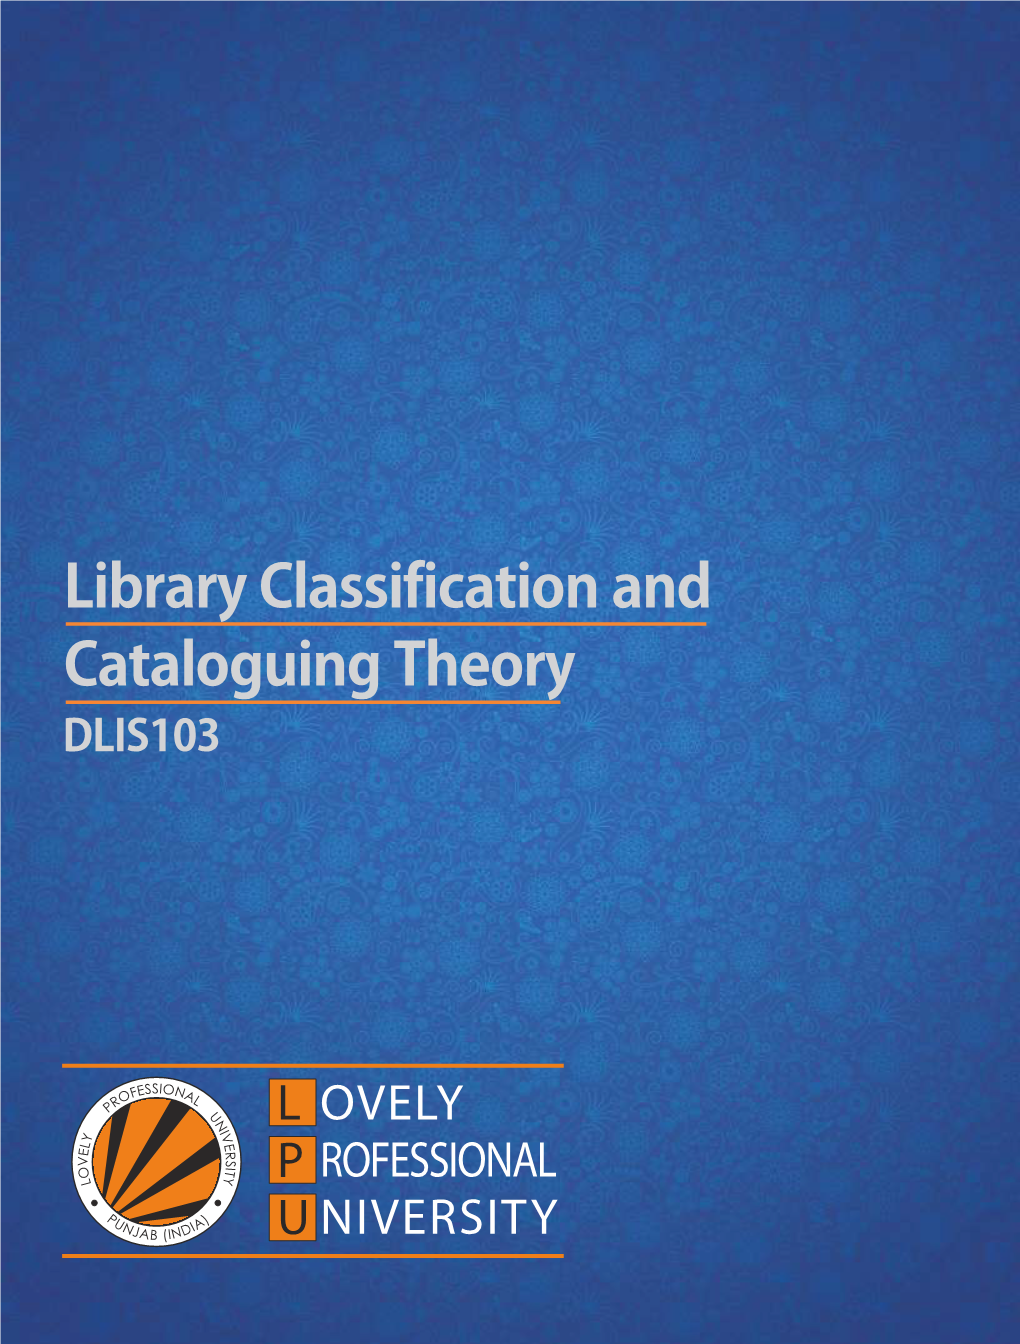 Library Classification and Cataloguing Theory